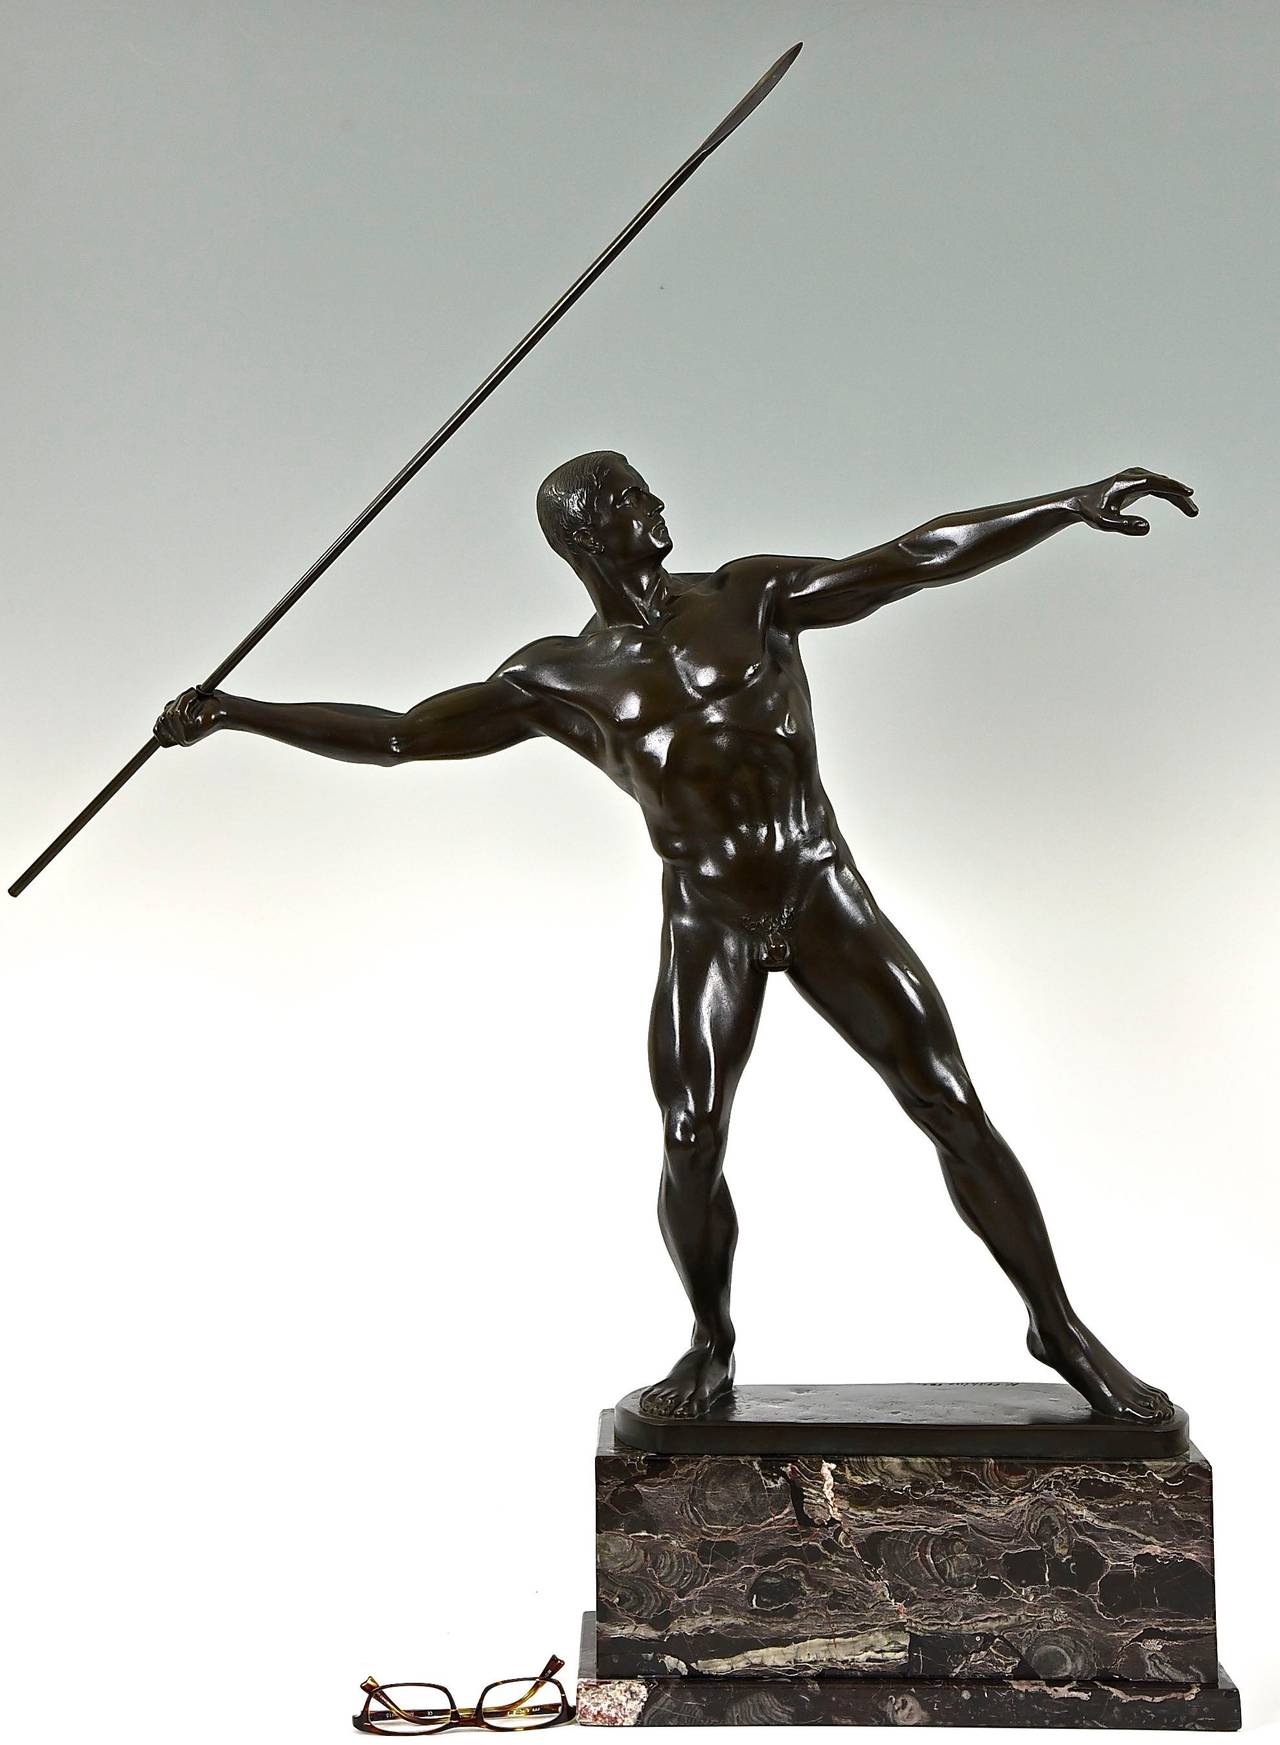 Art Deco bronze of a javelin thrower. H. 38 inch.
By Karl Möbius, Germany, 1876-1953.
Signature: K. Möbius.
Date:  1921.
Material: Black patinated bronze.  Marble base.
Origin:  Germany. 

Size of the male nude with spear:
H. 37.8 inch x